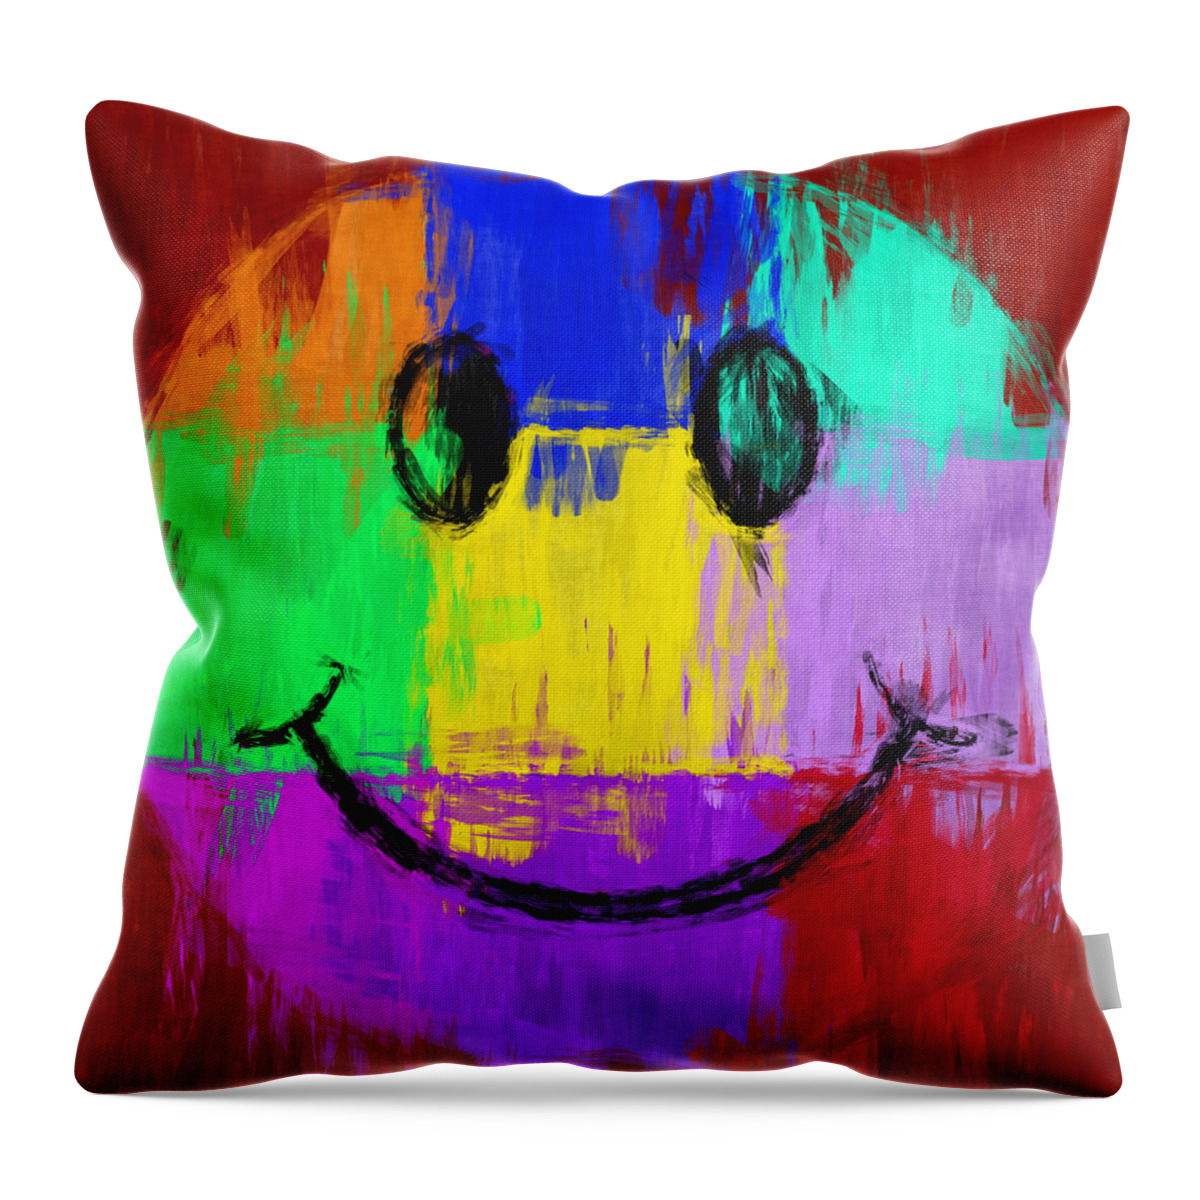 Smiley Throw Pillow featuring the digital art Abstract Smiley Face #1 by David G Paul